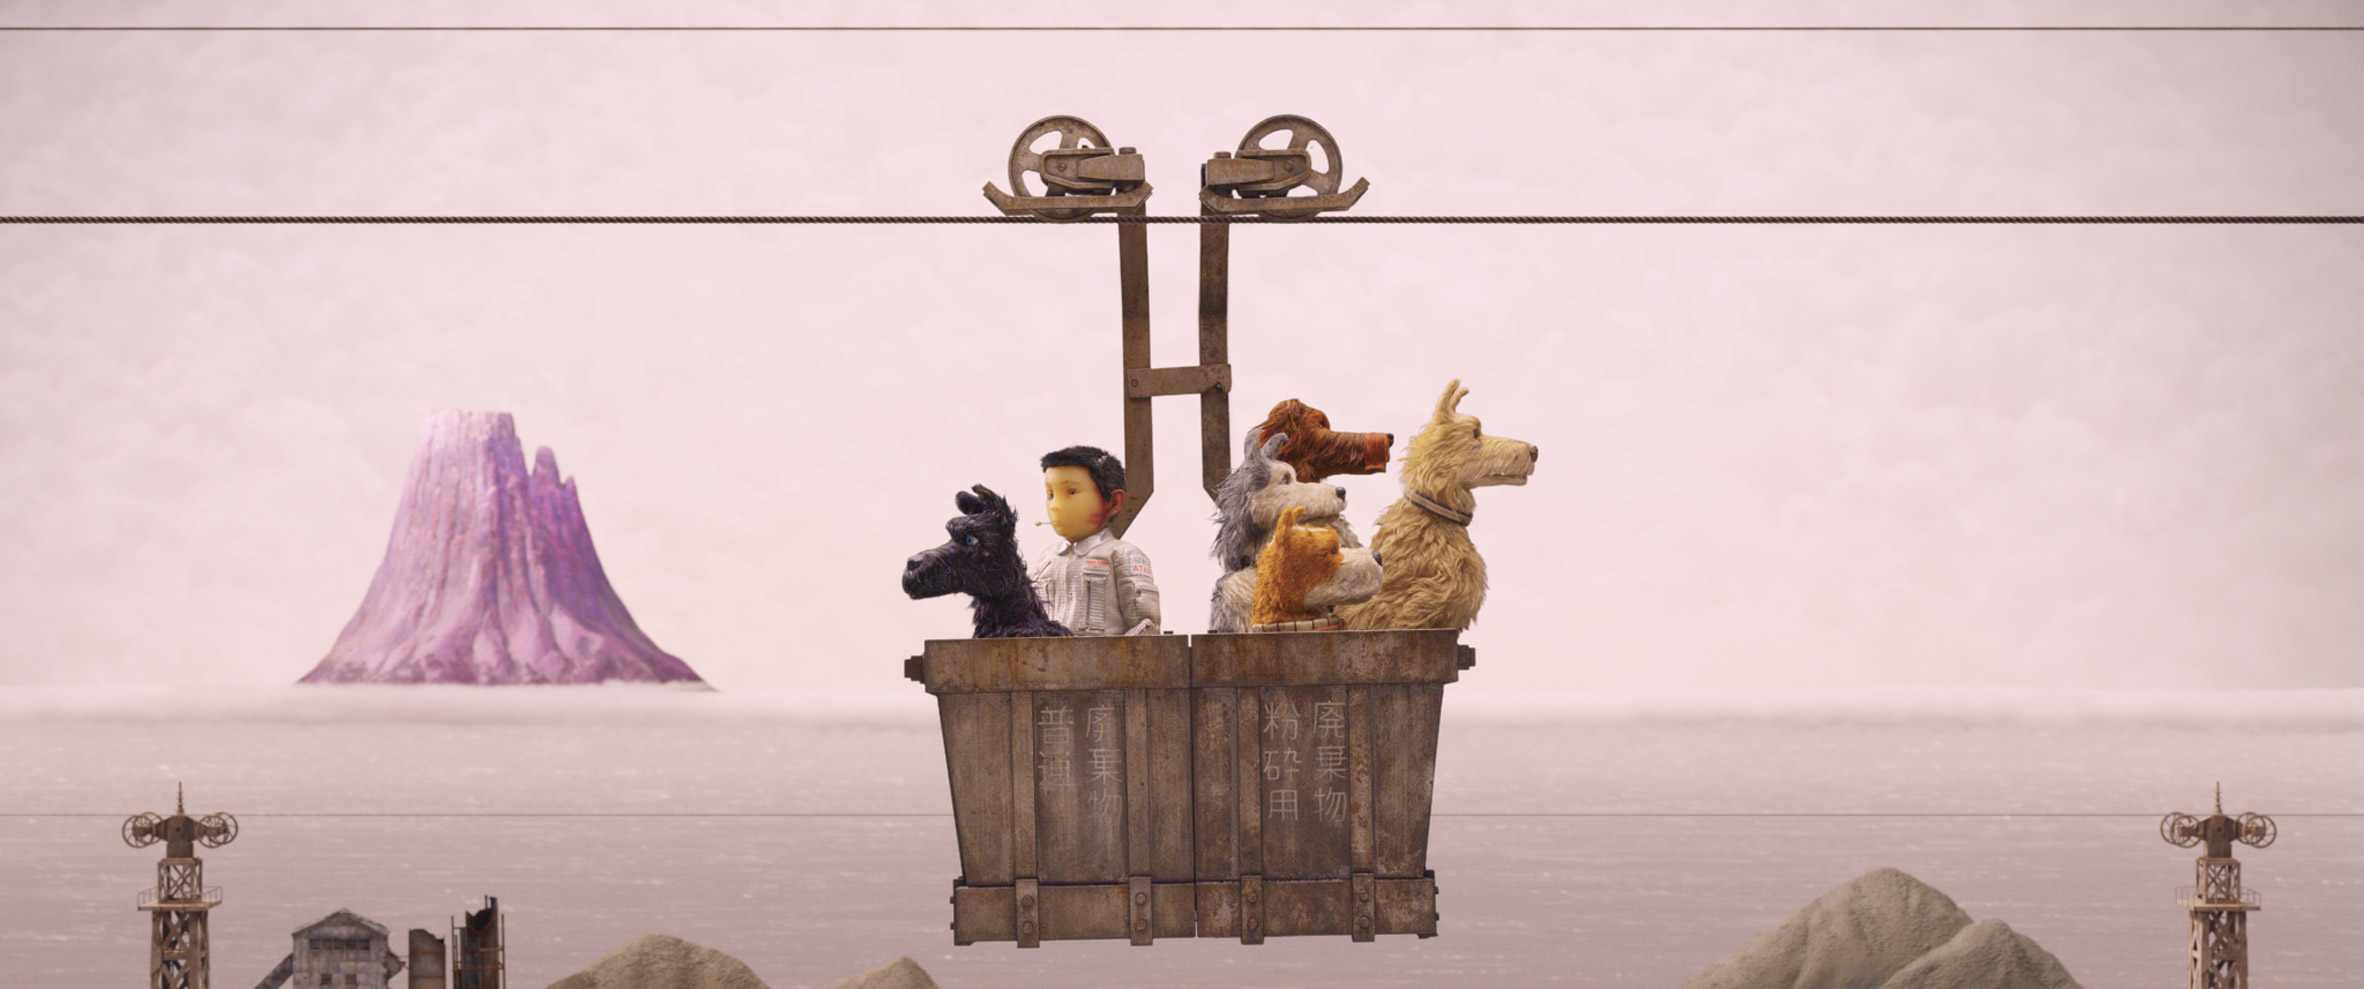 Wes Anderson's Isle of Dogs film is inspired by Metabolism.